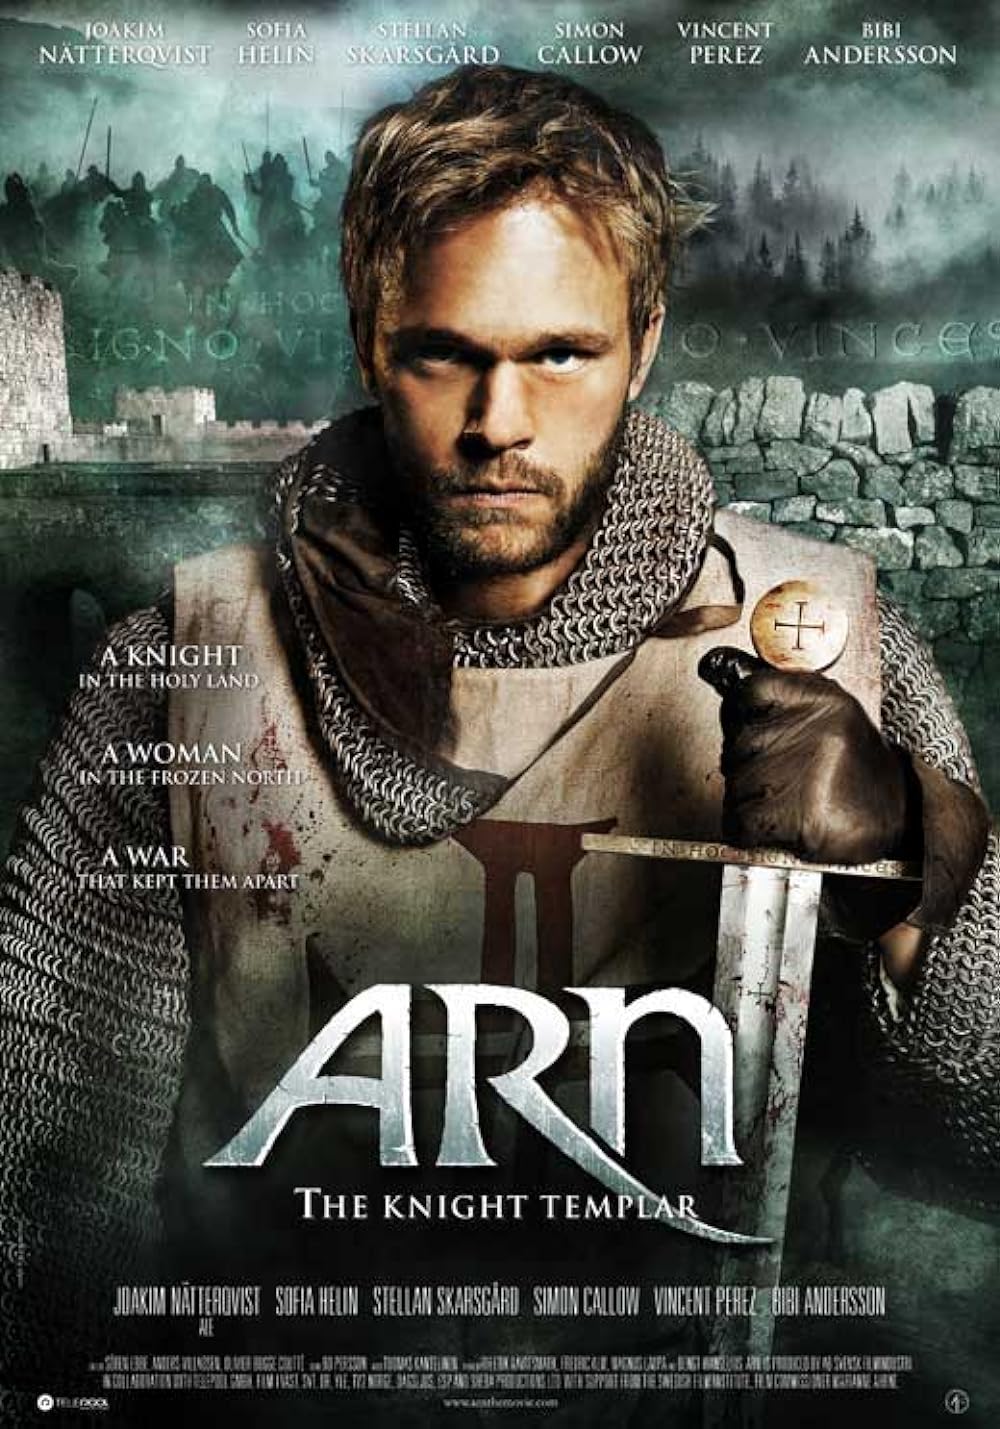 Arn: The Kingdom at the End of the Road (2008) 192Kbps 25Fps 48Khz 2.0Ch DVD Turkish Audio TAC